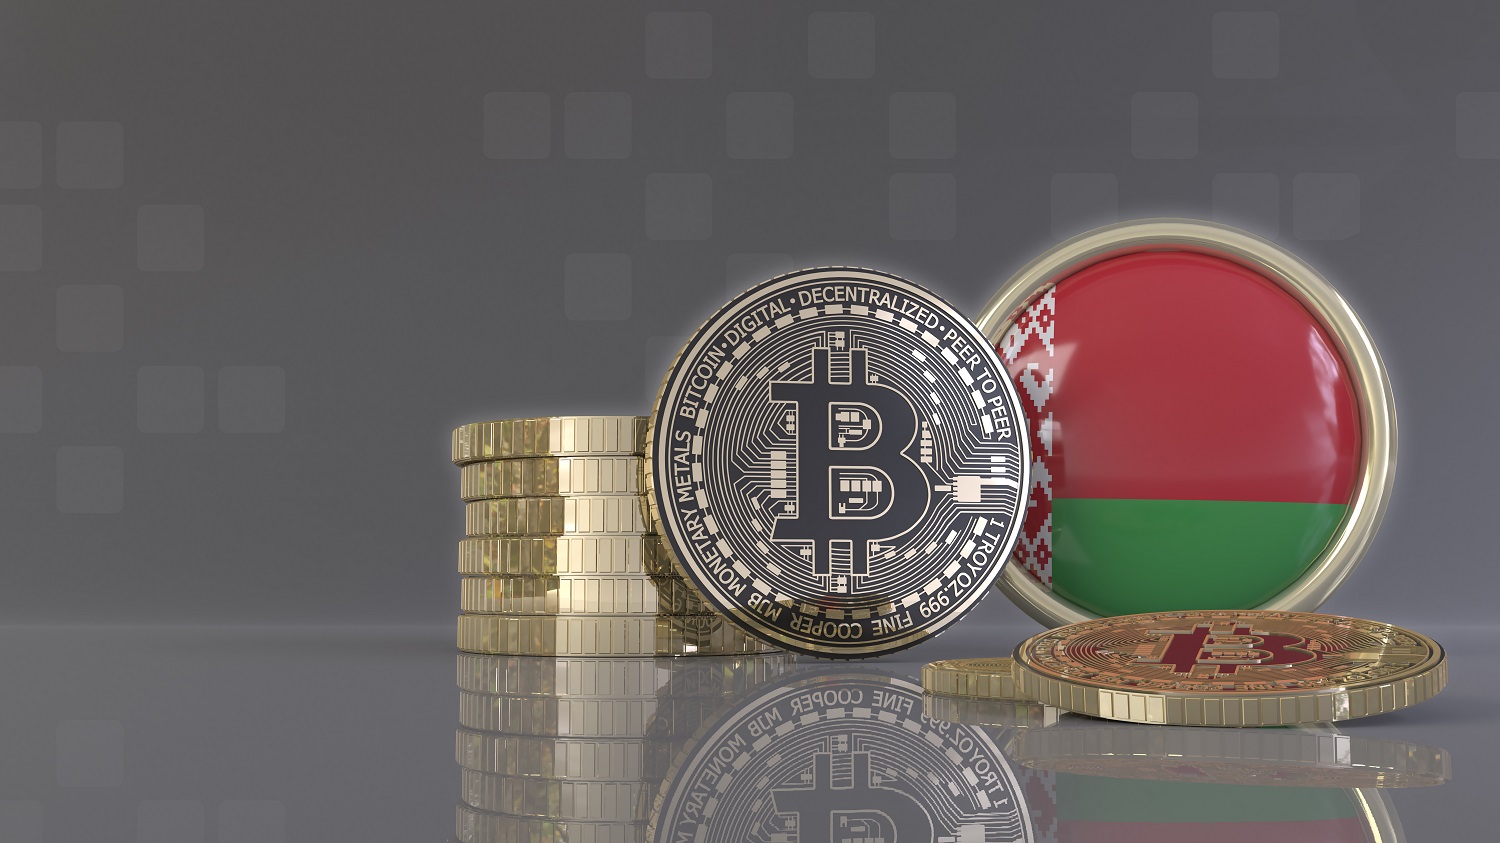 Metal tokens intended to represent Bitcoin, along with a badge decorated in the colors of the Belarusian flag.